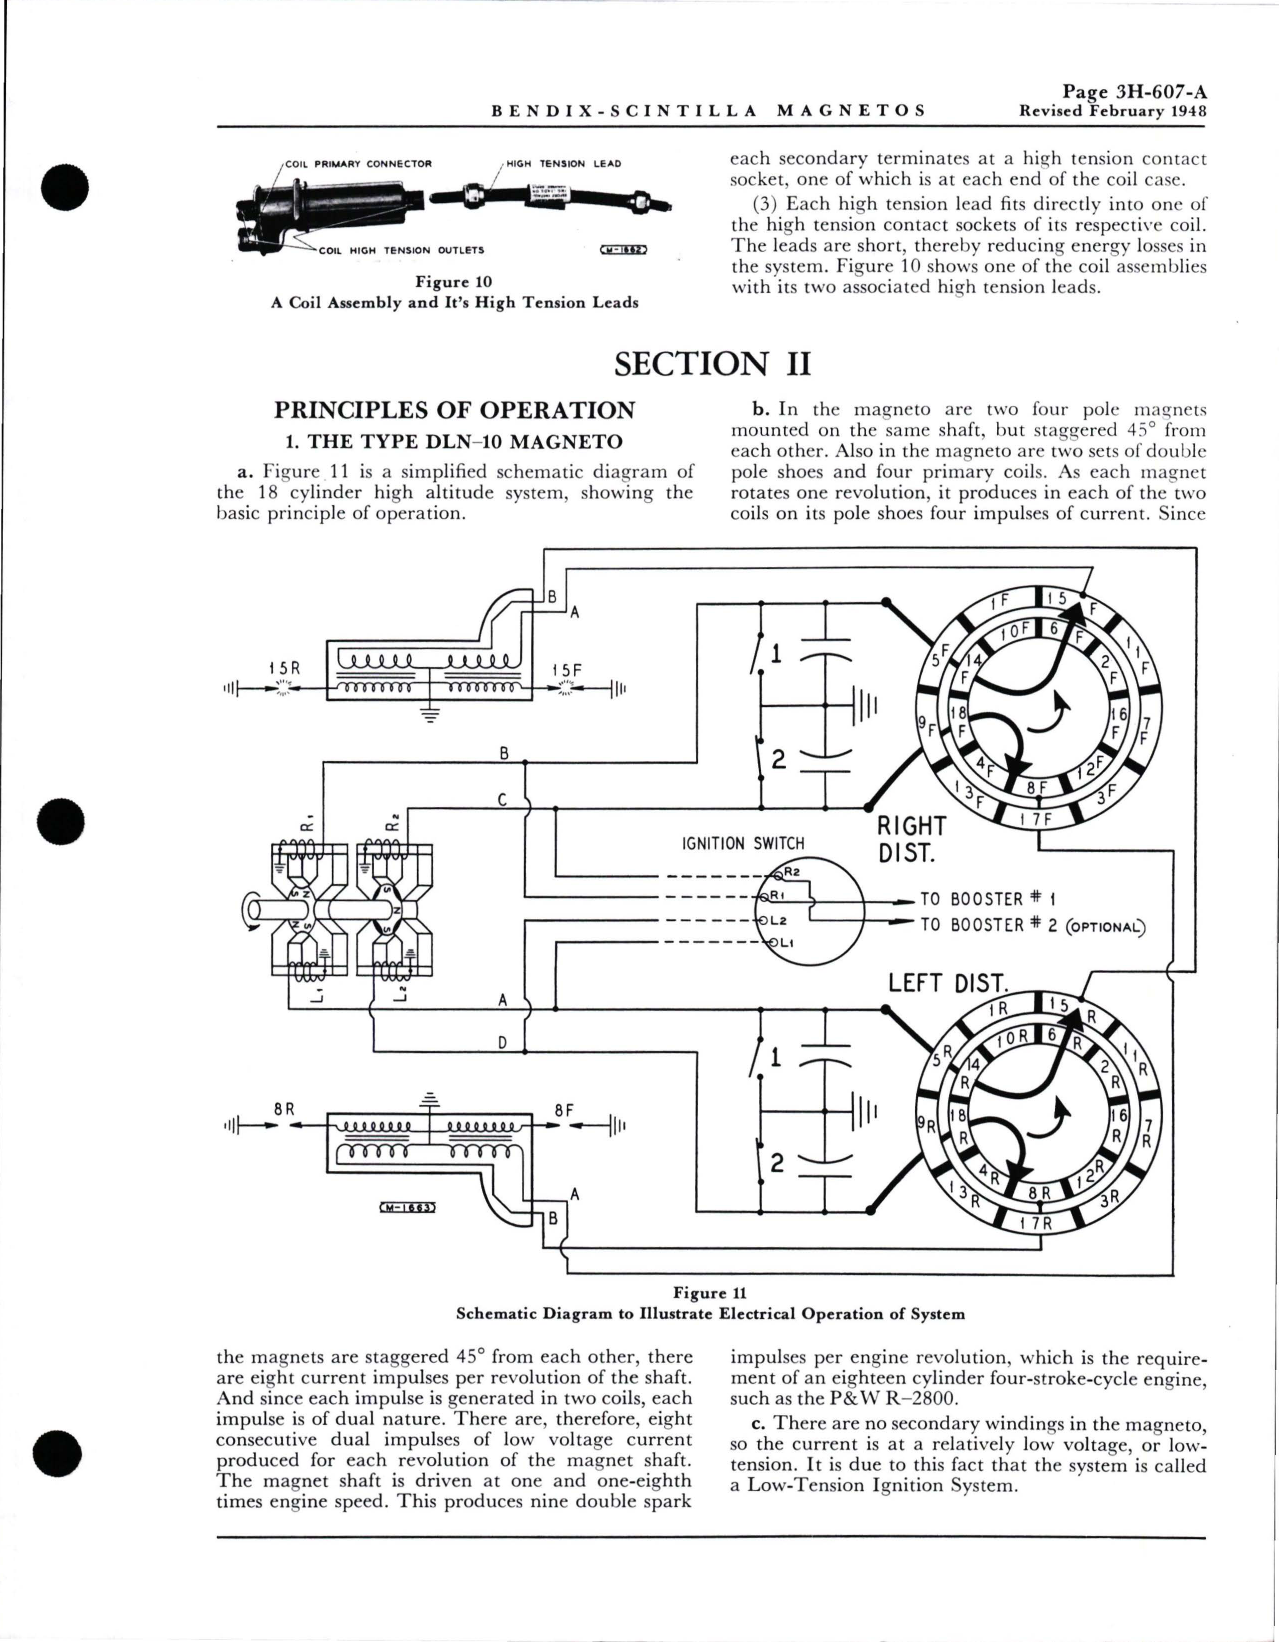 Sample page 7 from AirCorps Library document: Service Instructions for Bendix Scintilla Low Tension - High Altitude Ignition System used on Pratt & Whitney R-2800-C Engines